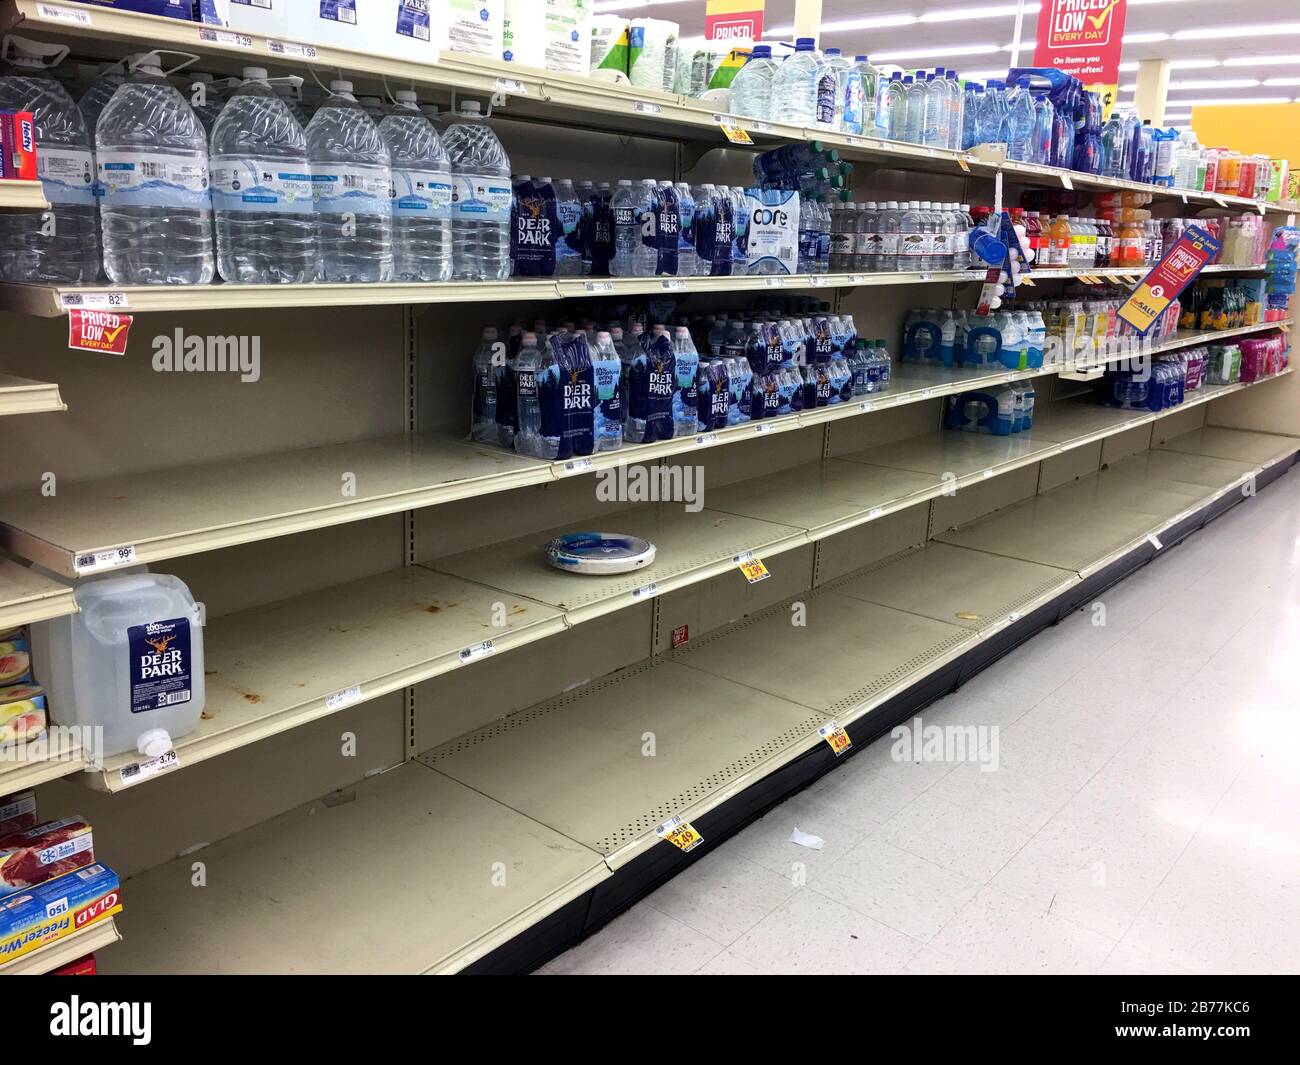 Food Lion in Priest Point shopping center on Bell Road experiences bottled water shortages and empty shelves as shoppers react to the tornado devastation and the coronavirus by stocking up on essential supplies Friday, March 13, 2020, in Nashville, Tennessee, USA. (Photo by IOS/Espa-Images) Stock Photo